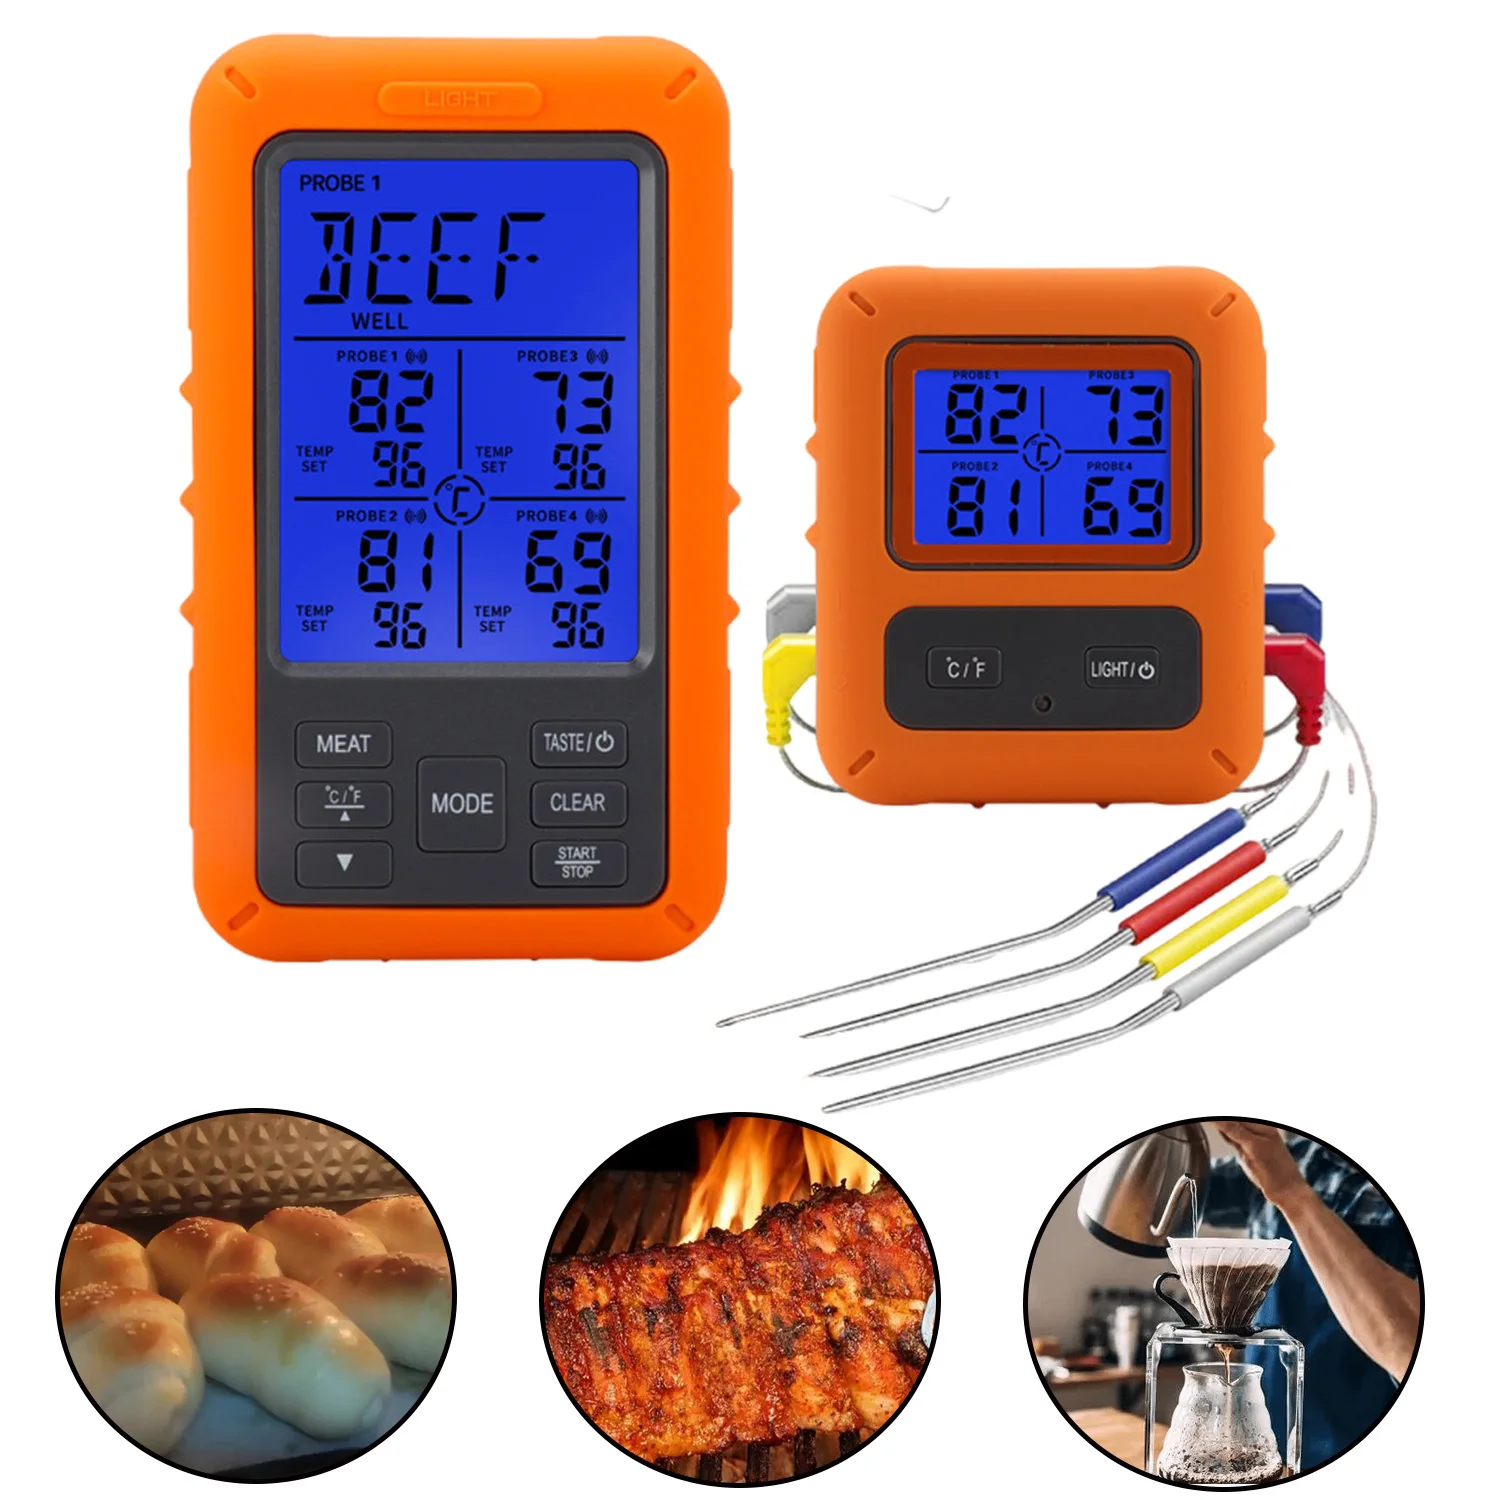 

Food Thermometer,High Temperature Alarm,Dual Screen Instant Read Dial Probe for Kitchen Cooking Milk Coffee Barbecue Toast